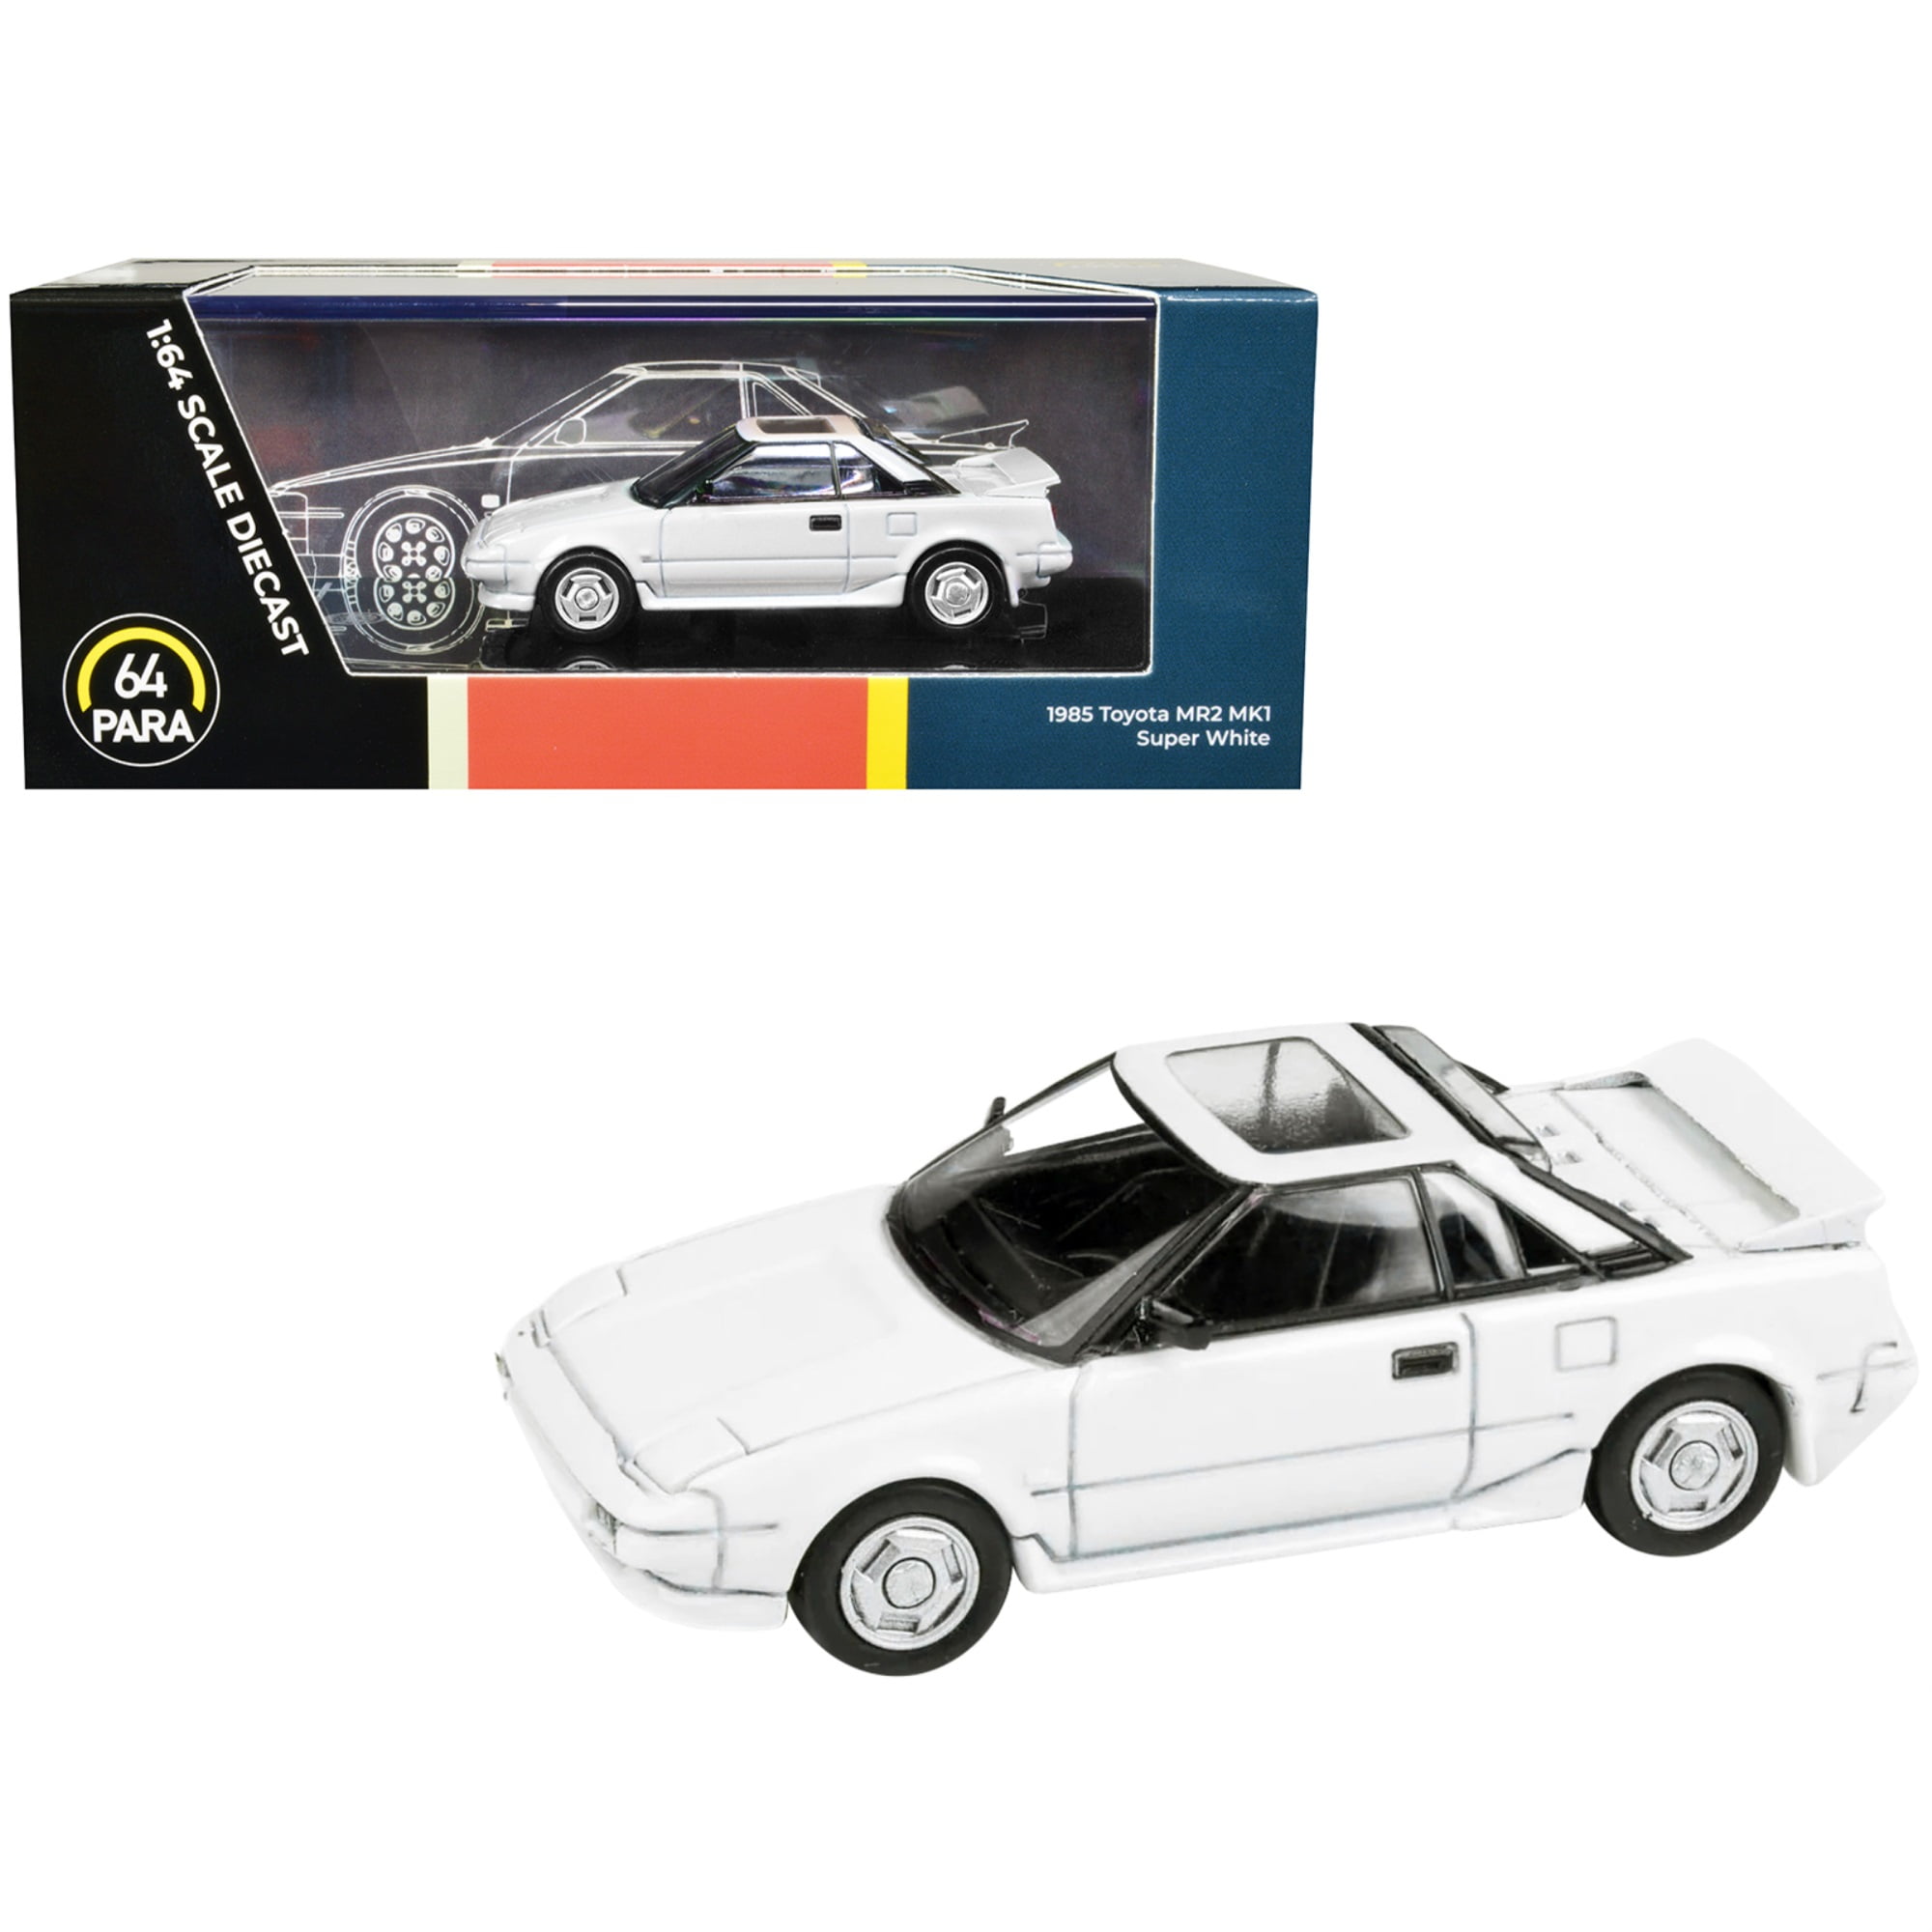 1985 Toyota MR2 MK1 Super White with Sunroof 1/64 Diecast Model Car by  Paragon Models